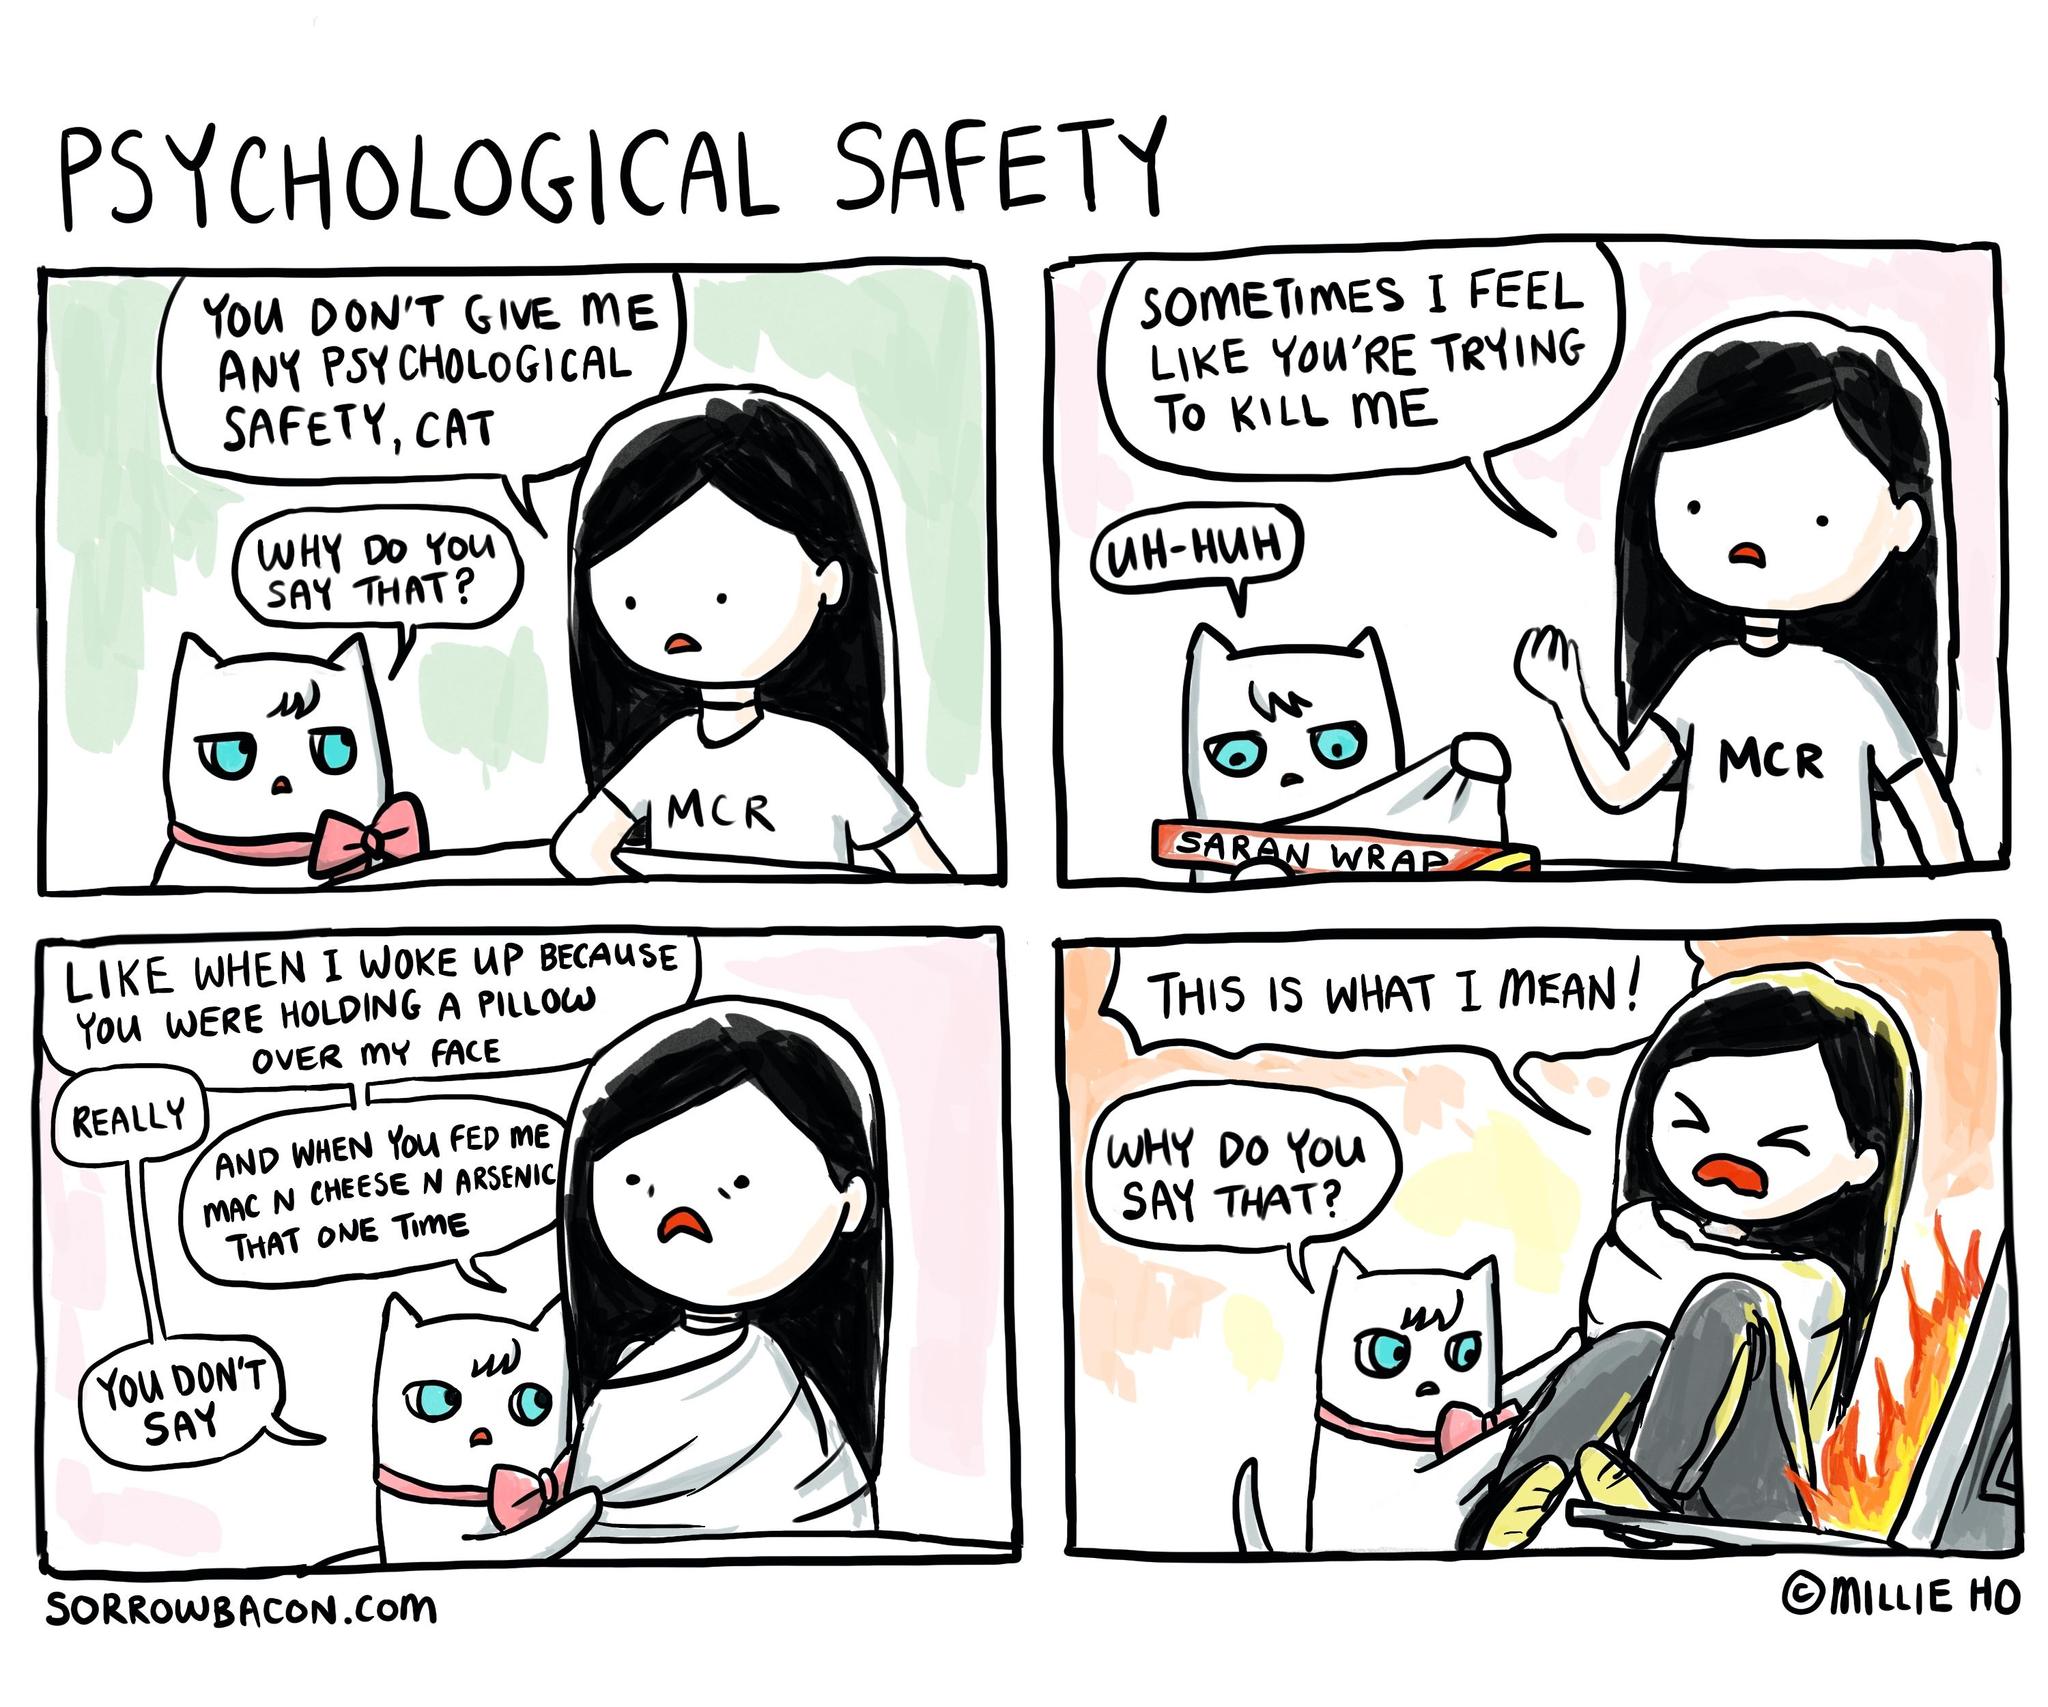 Psychological Safety sorrowbacon comic